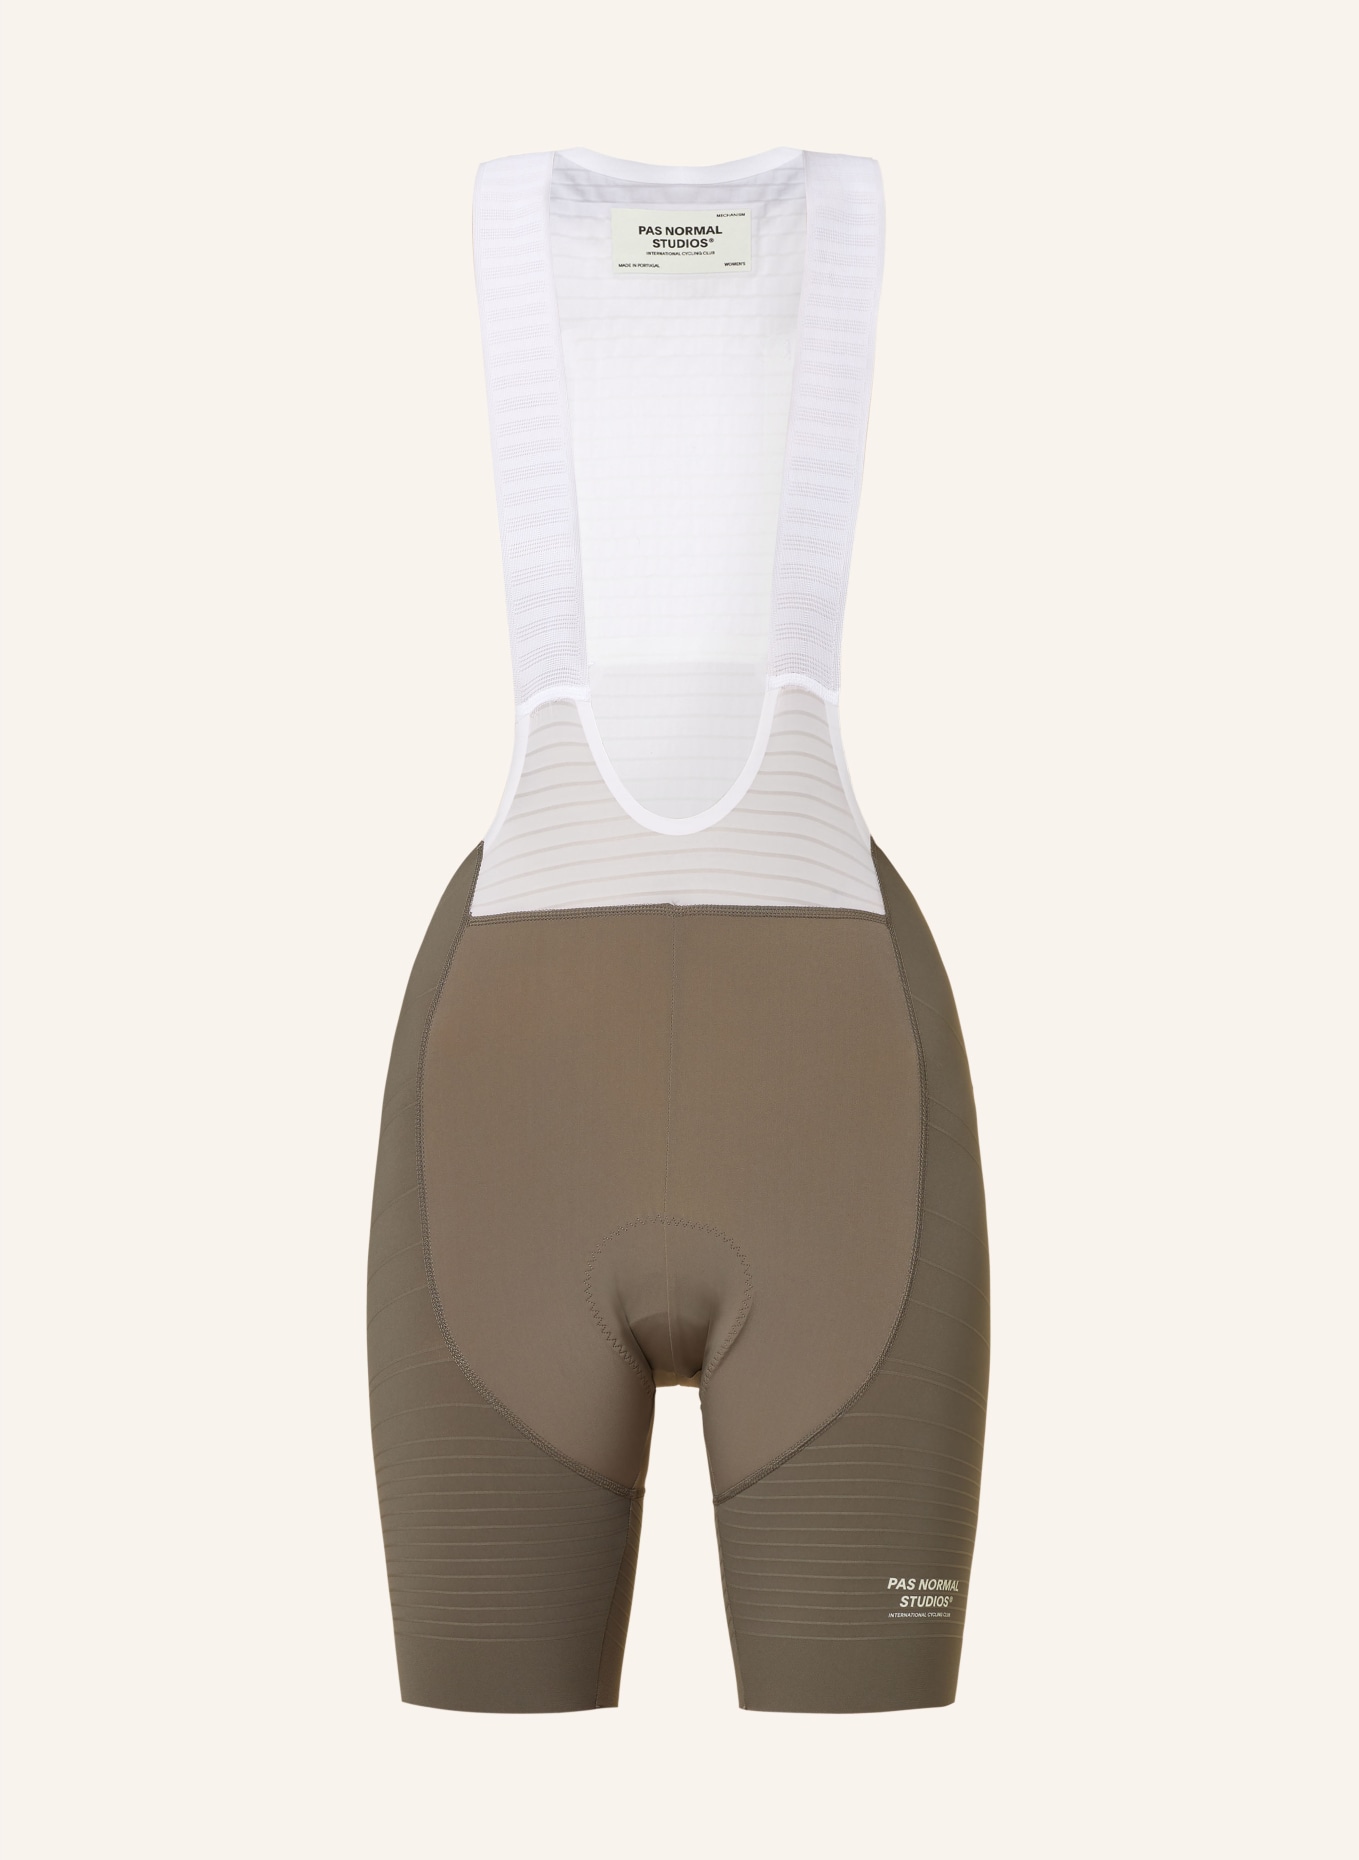 PAS NORMAL STUDIOS Cycling shorts MECHANISM PRO with straps and padded insert, Color: TAUPE/ WHITE (Image 1)